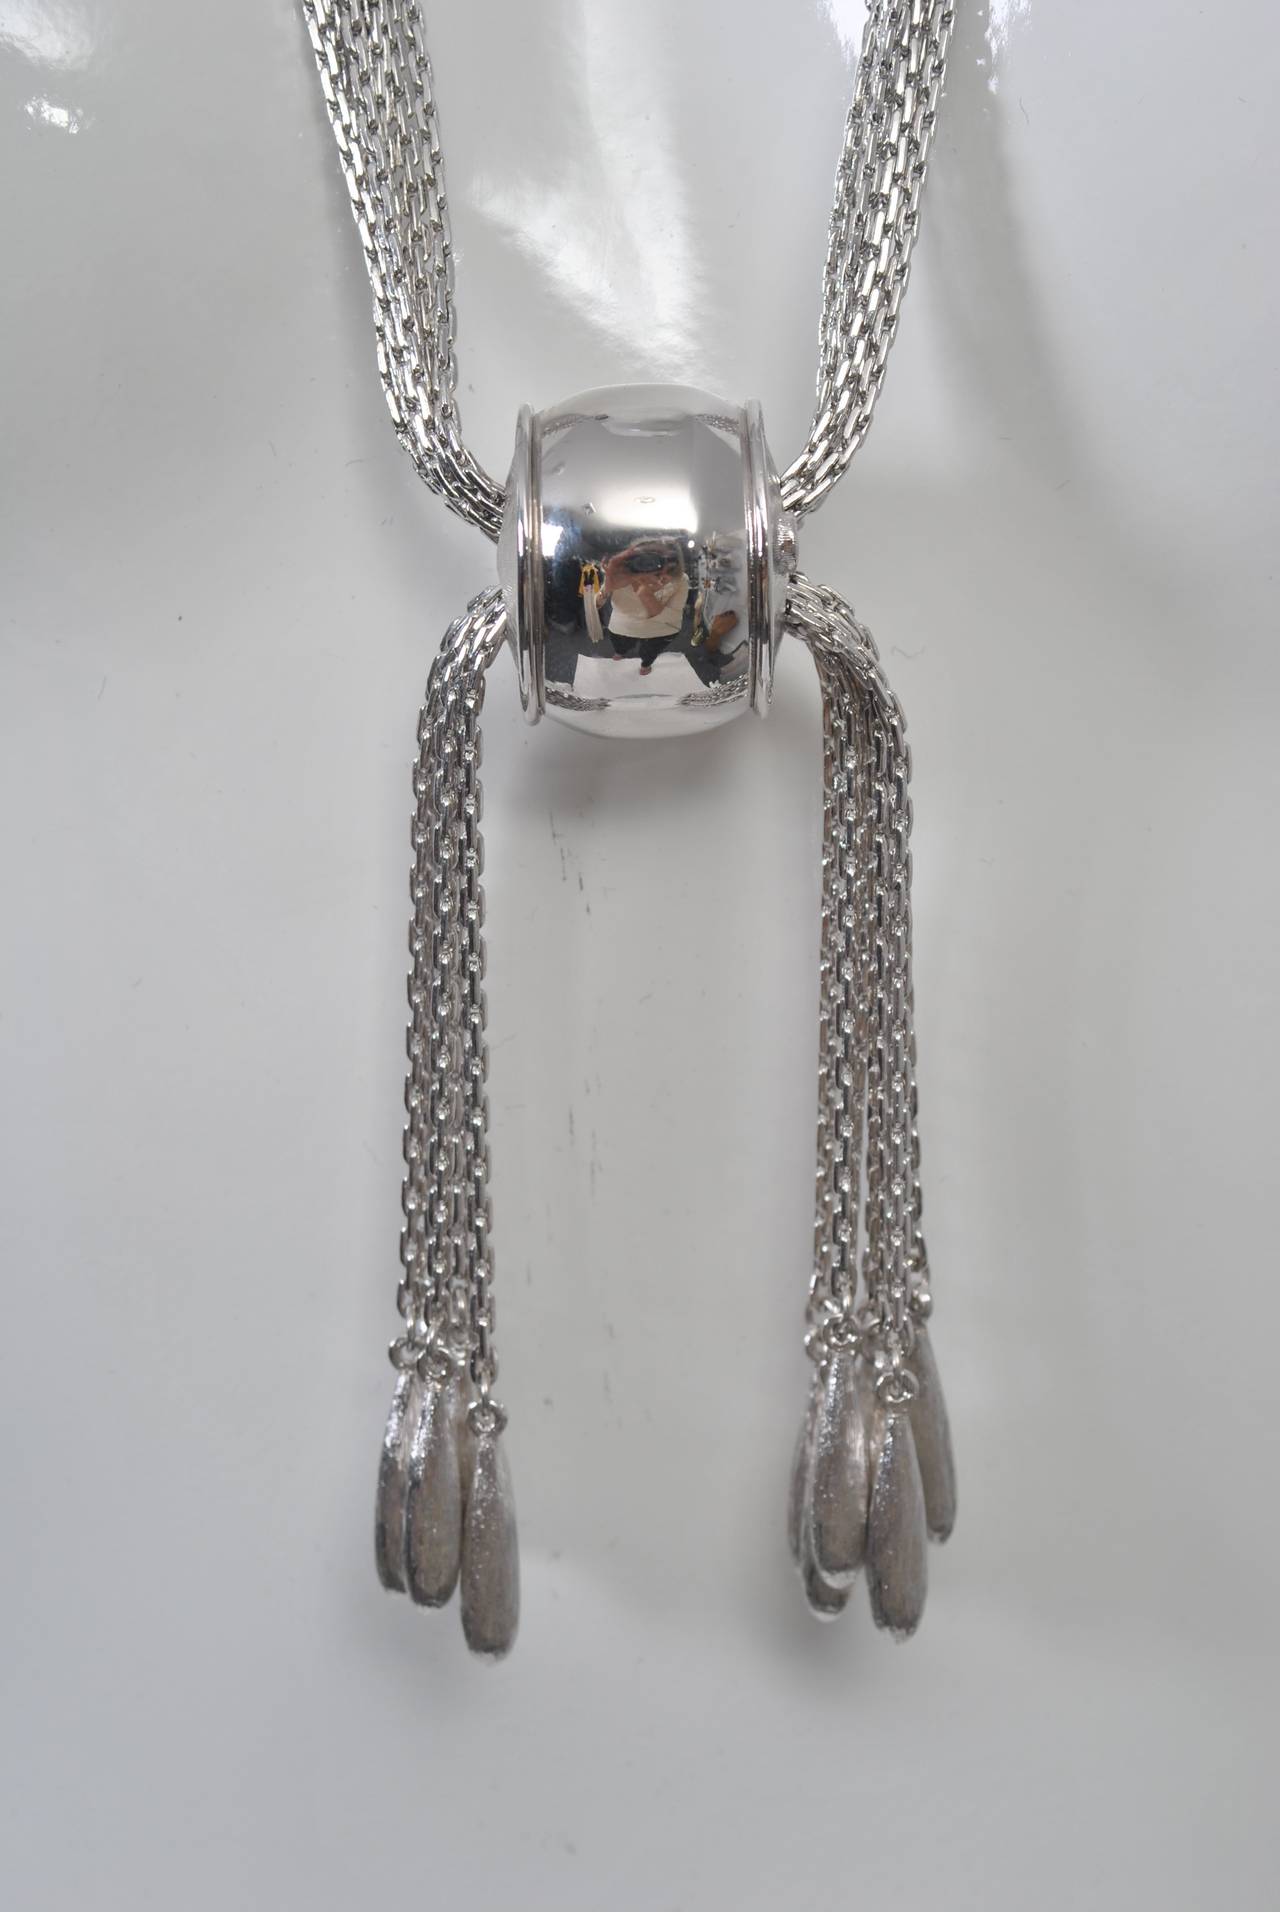 Long Monet necklace composed of multi strands of silver chain caught in the middle with a polished silver barrel and terminating with silver tassels at the ends. slide the barrel to achieve different looks. Back clasp.